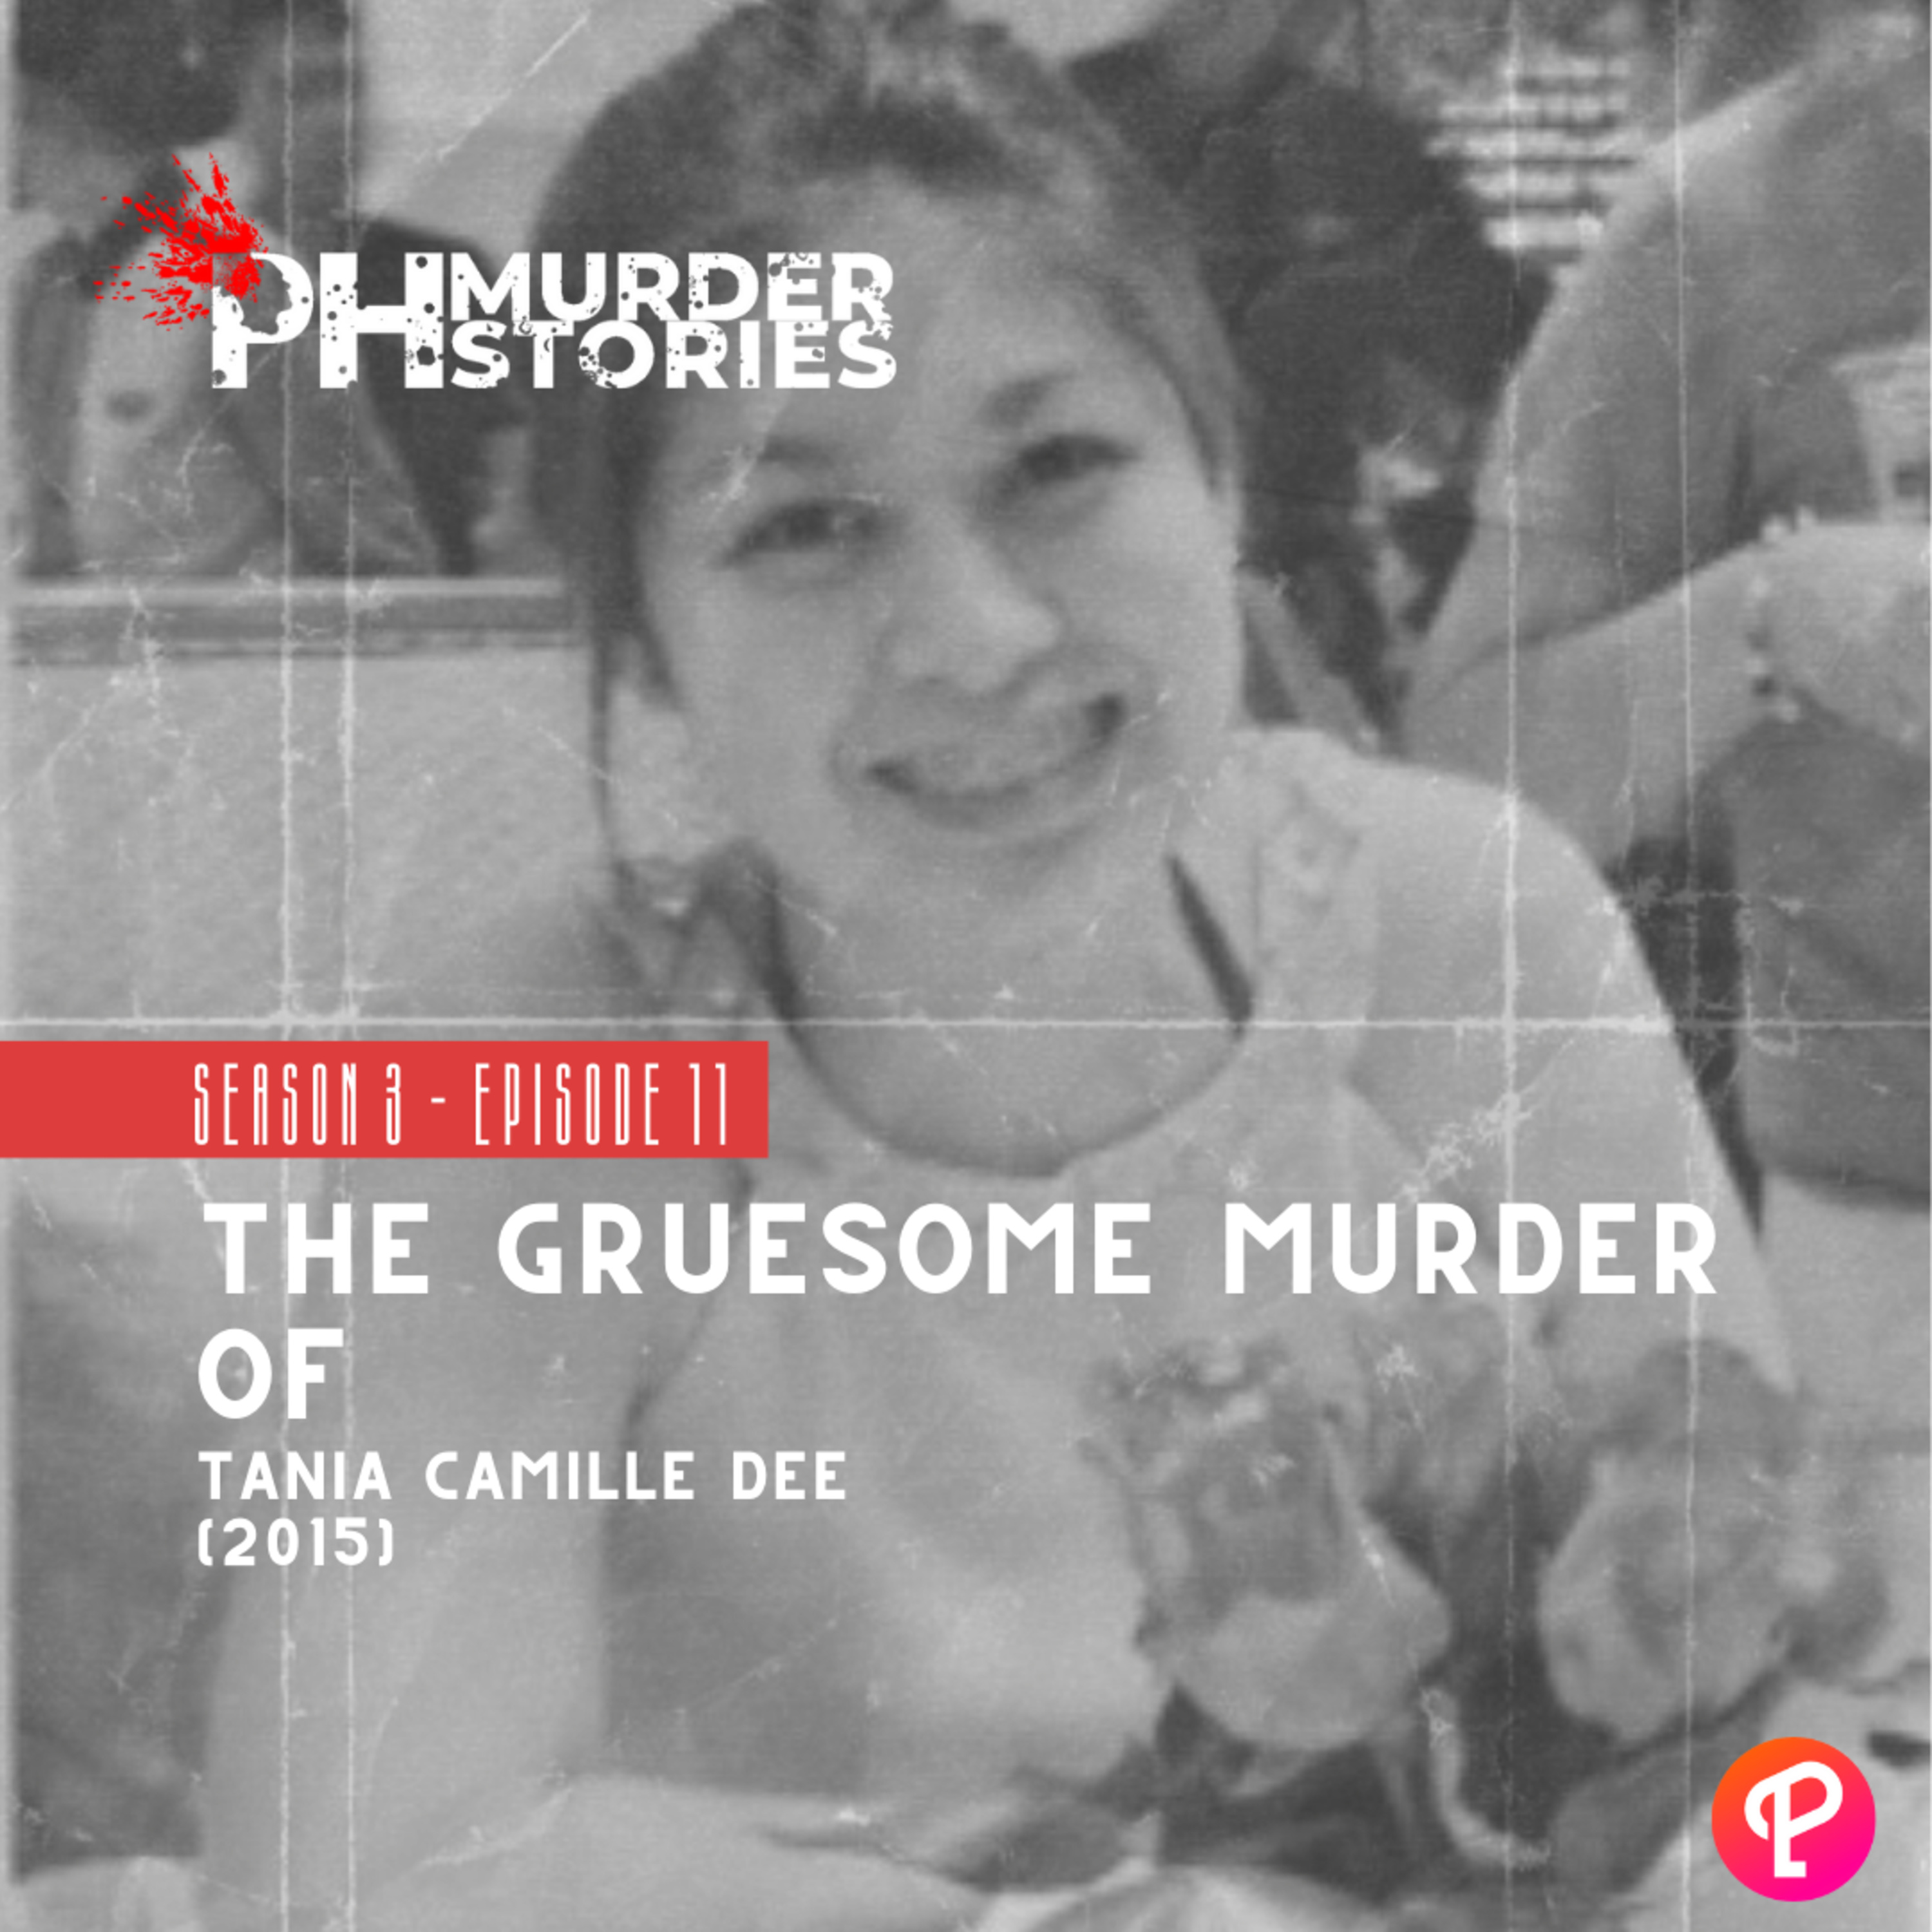 The Gruesome Murder of Tania Camille Dee (2015)